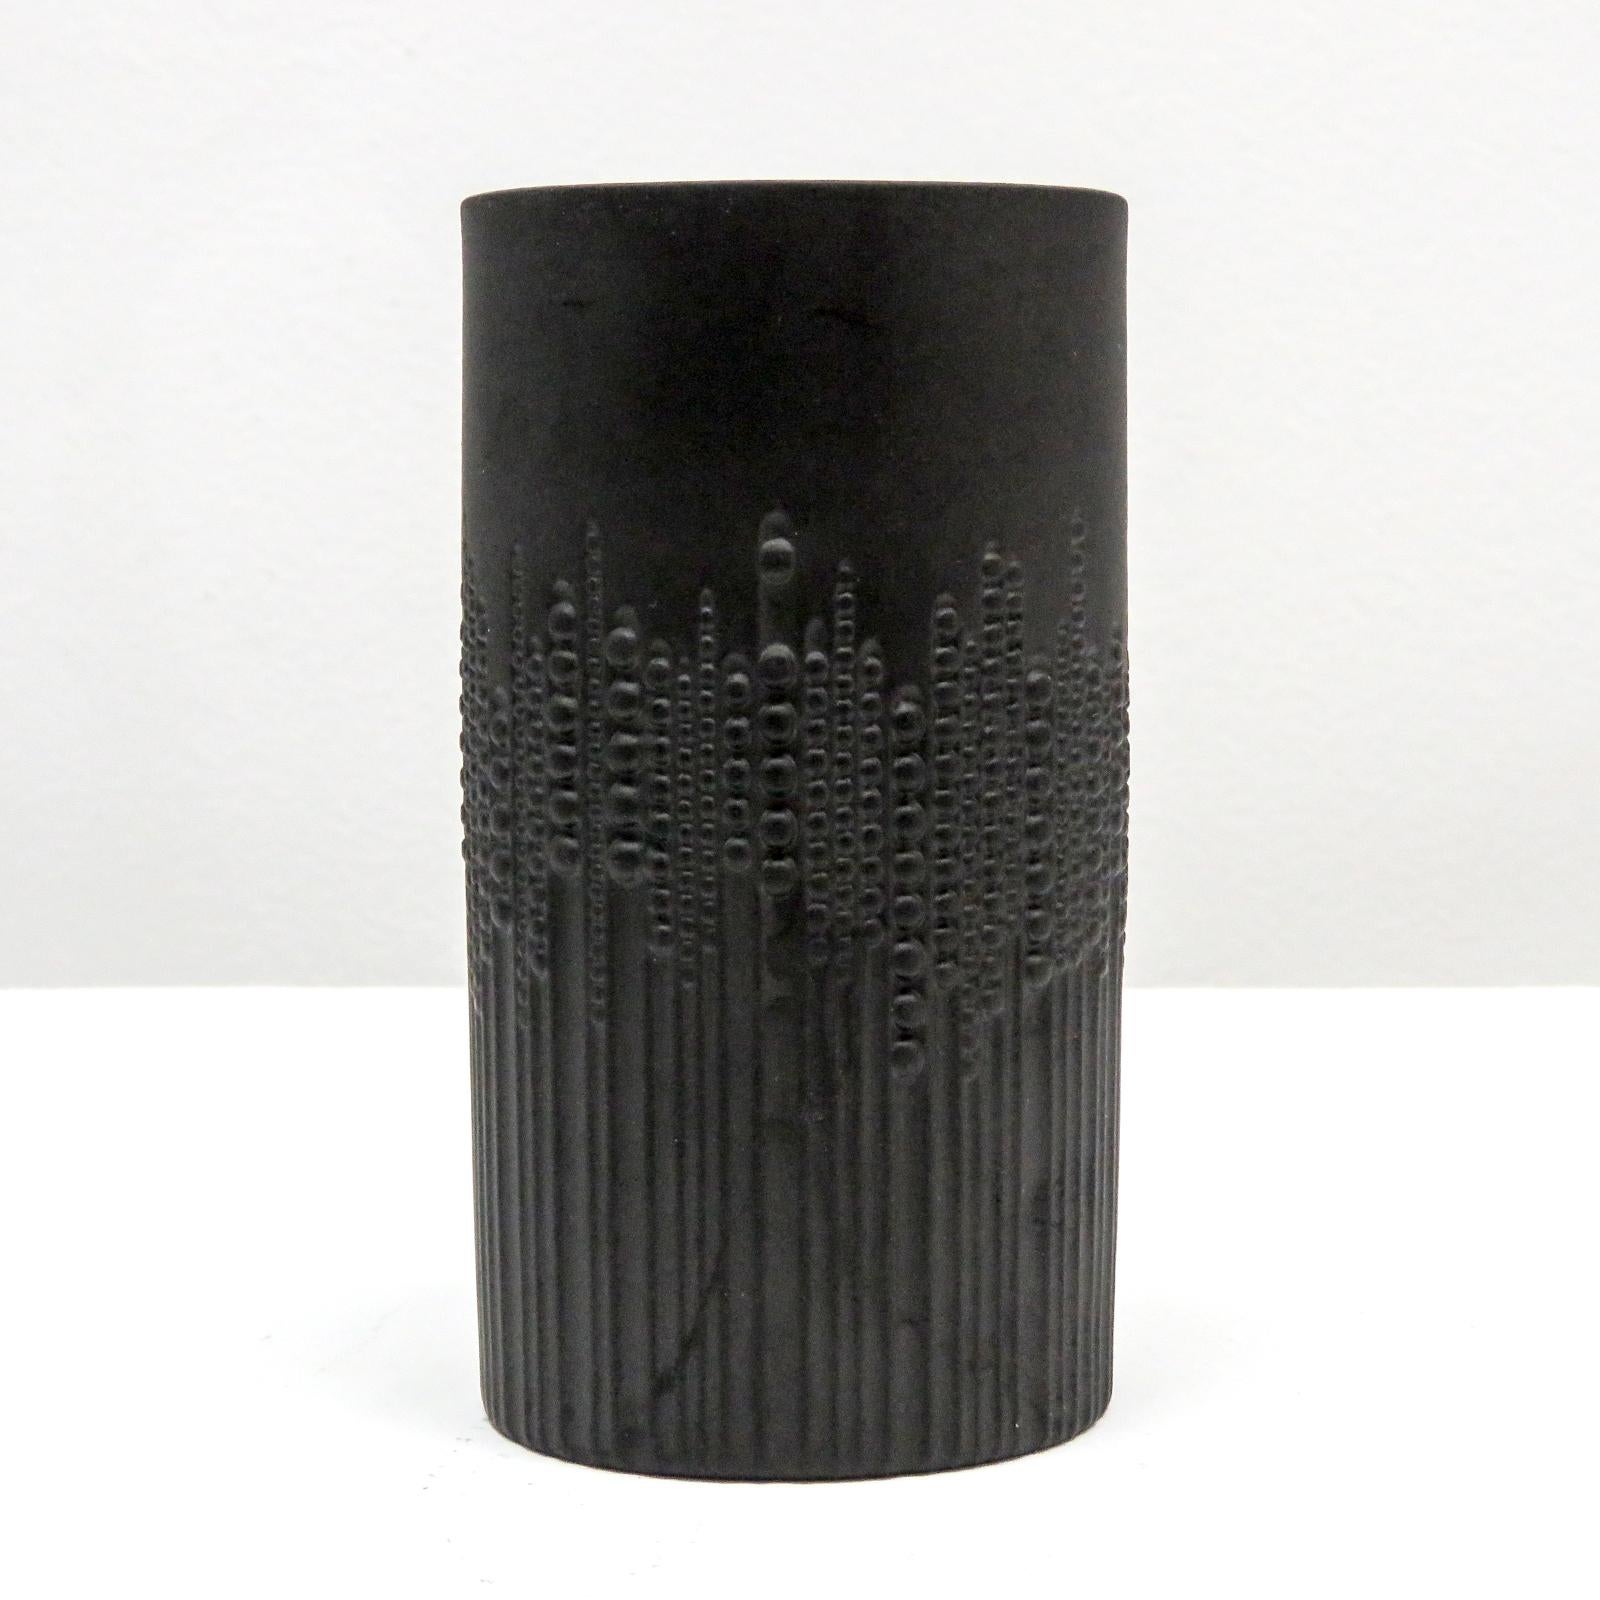 wonderful cylindrical black matte porcelain vase designed by Tapio Wirkkala for Rosenthal/Siemens, with sublime relief of beaded pearls running down vertical lines, gives an impression of movement, marked.